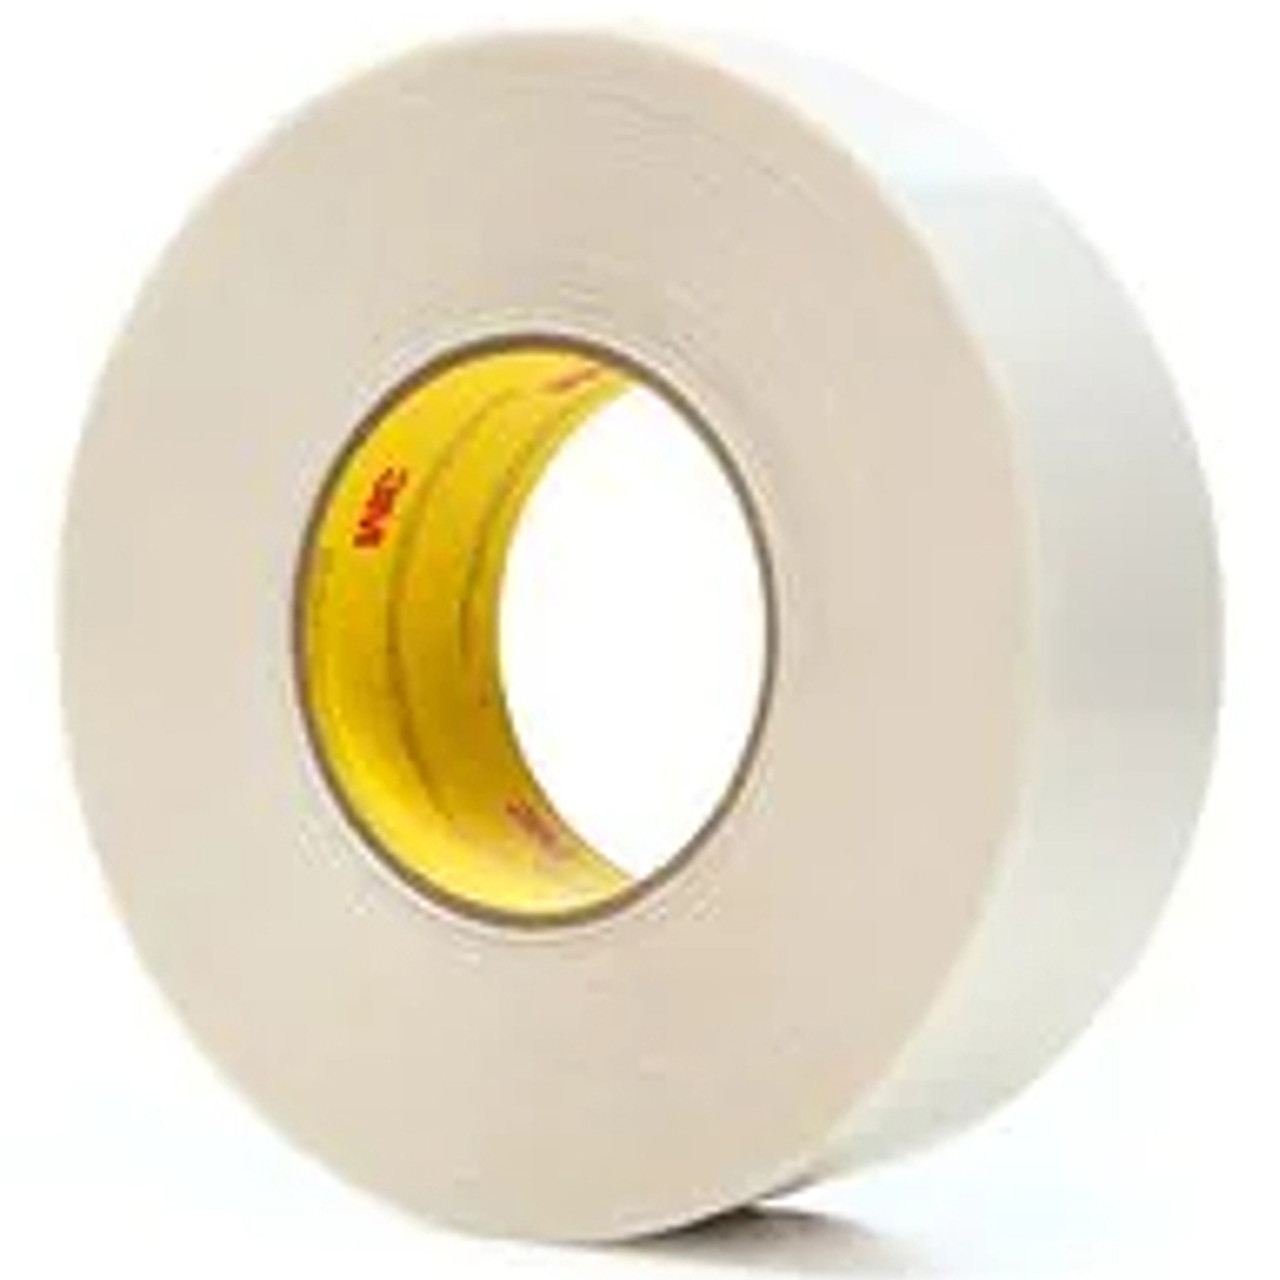 3M 7010535733  180 yd x 54.000 Width Double Sided Tape - All